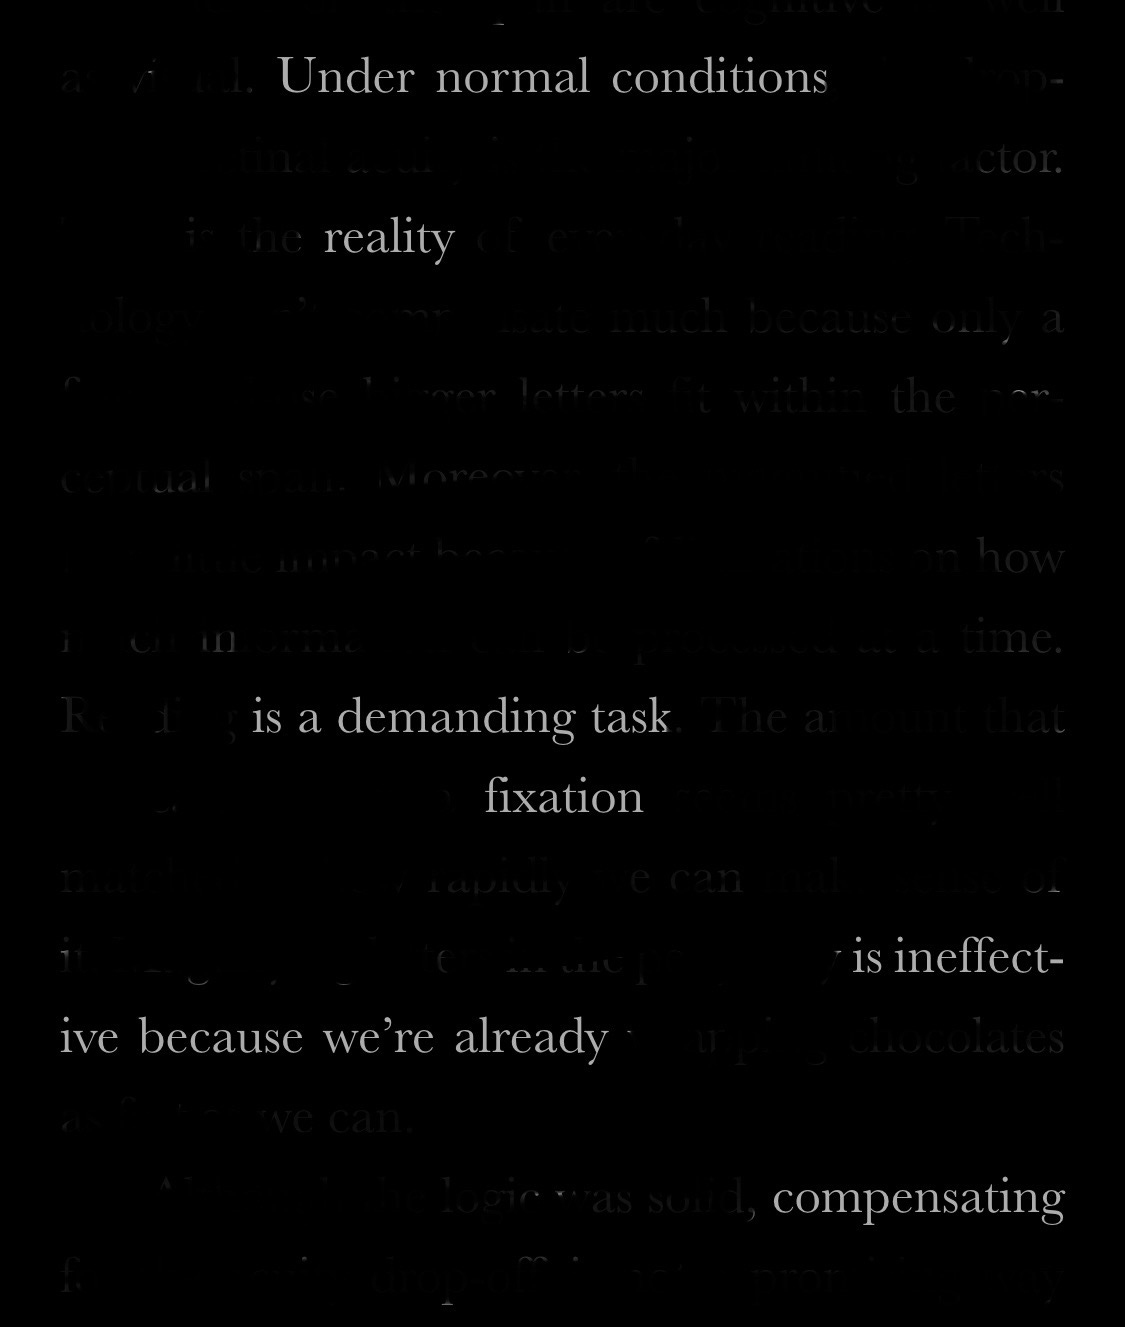 Under normal conditions / reality / is a demanding task / fixation / is ineffective because we're already / compensating